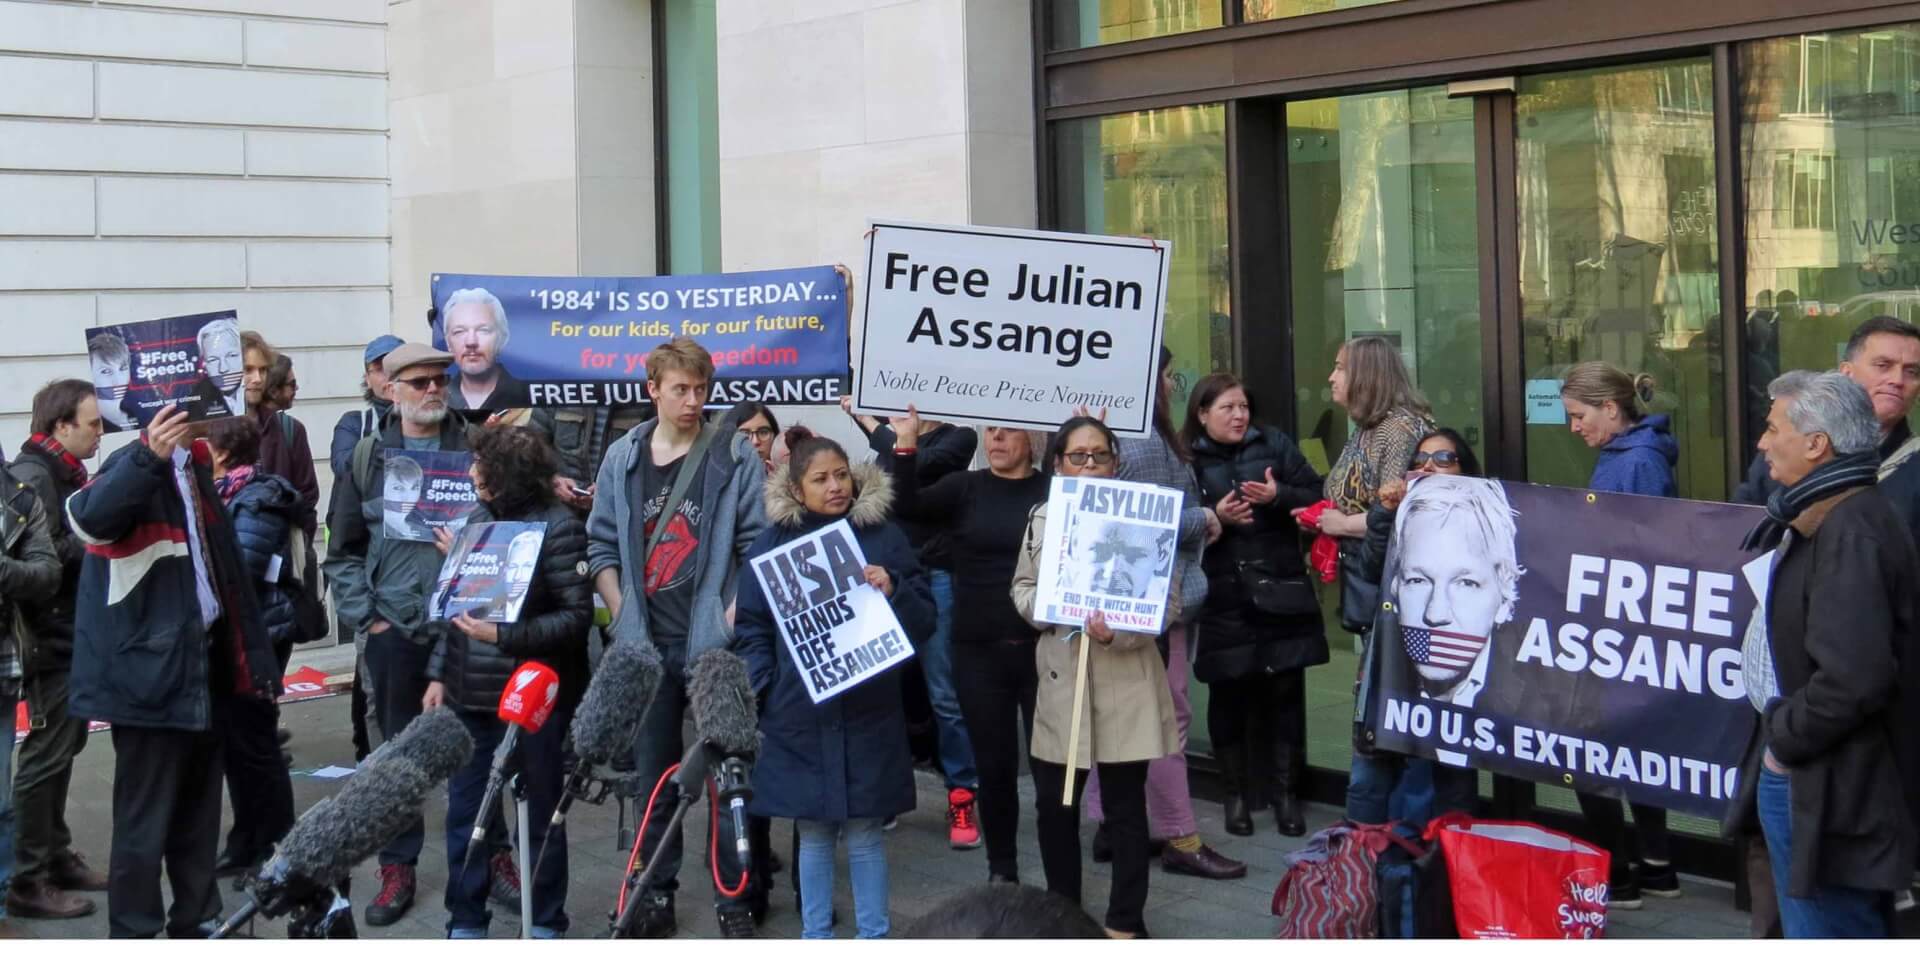 Julian Assange and the Freedom of Press debacle